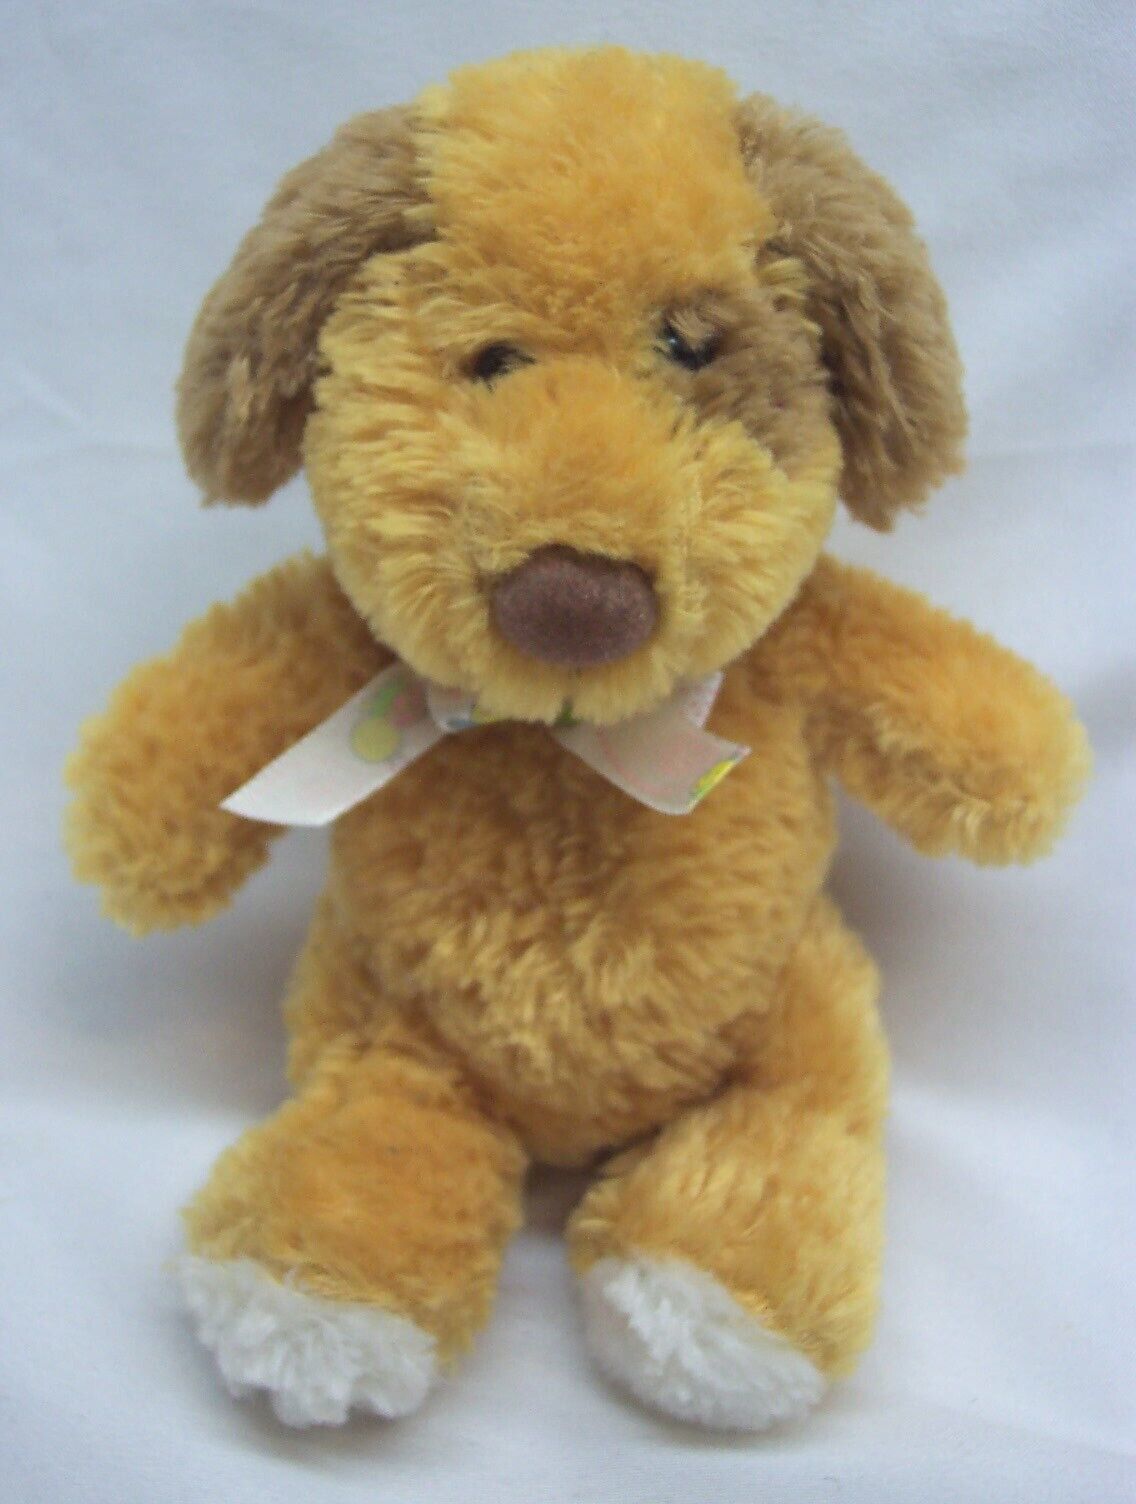 Primary image for Prestige Baby CUTE TAN PUPPY DOG RATTLE 4" Plush STUFFED ANIMAL Toy